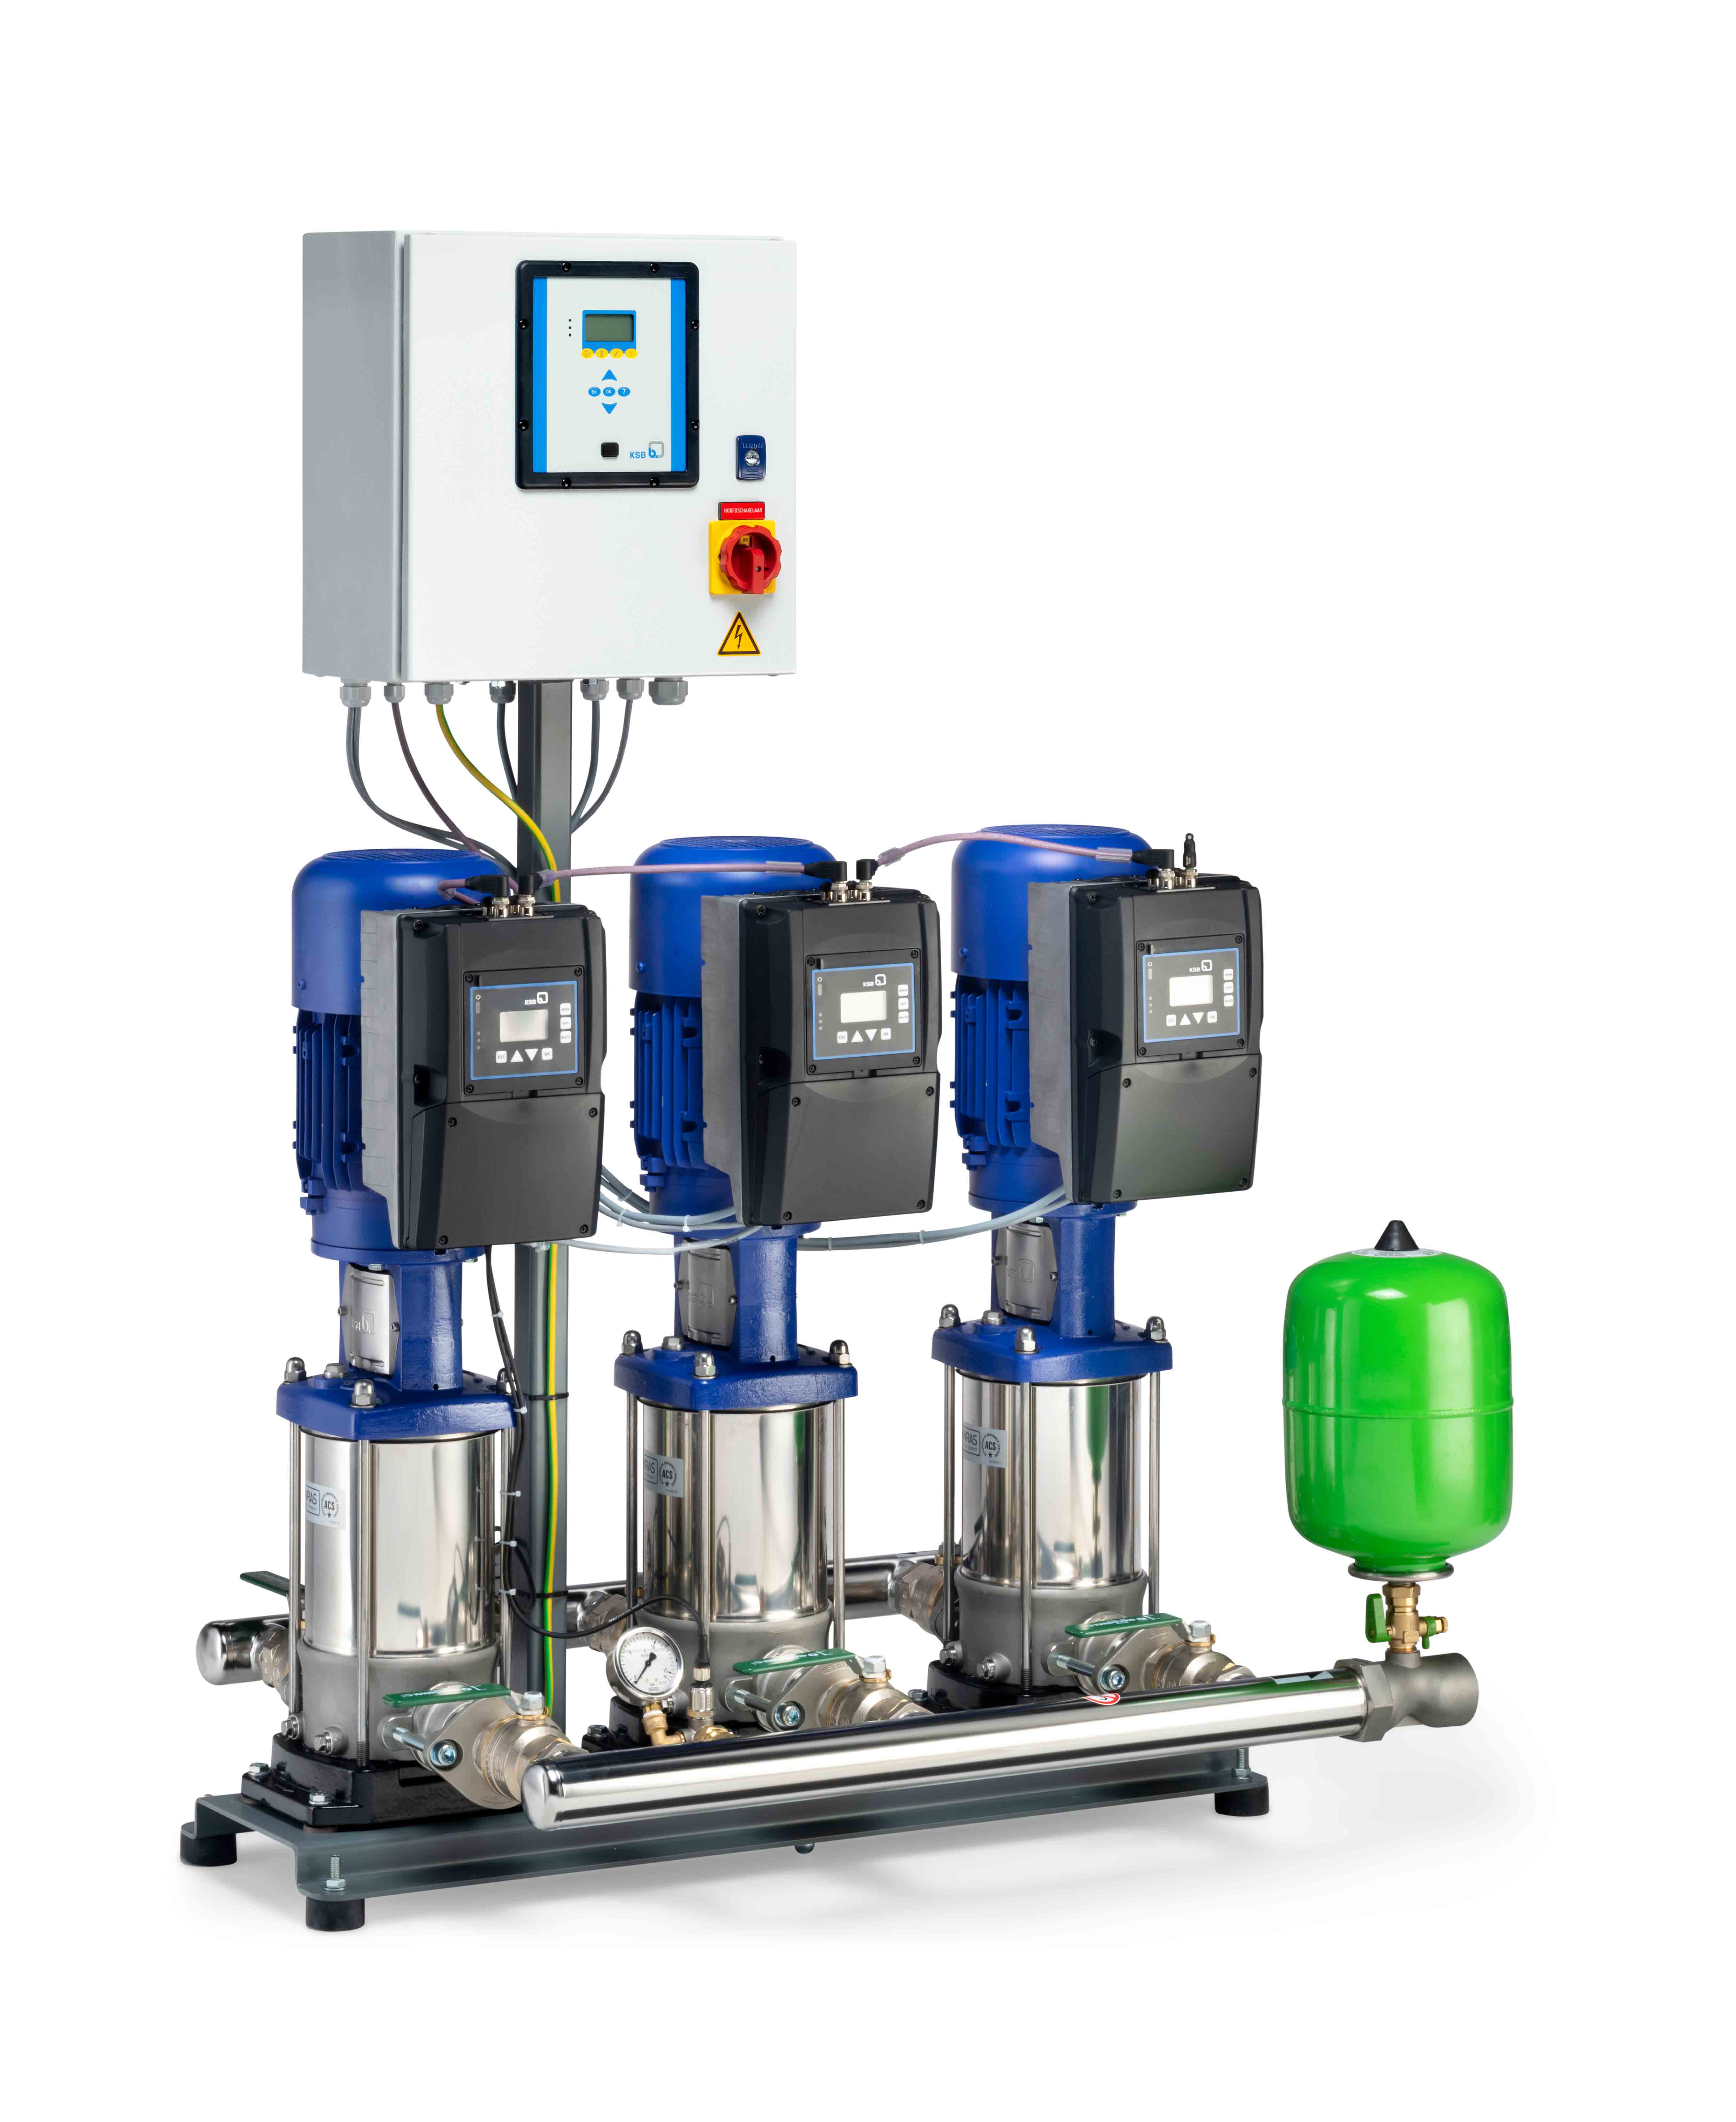 The new KSB Delta Primo are ready-to-connect, fully automatic pressure booster systems, fitted with two or three high-pressure pumps.  (Image: KSB)